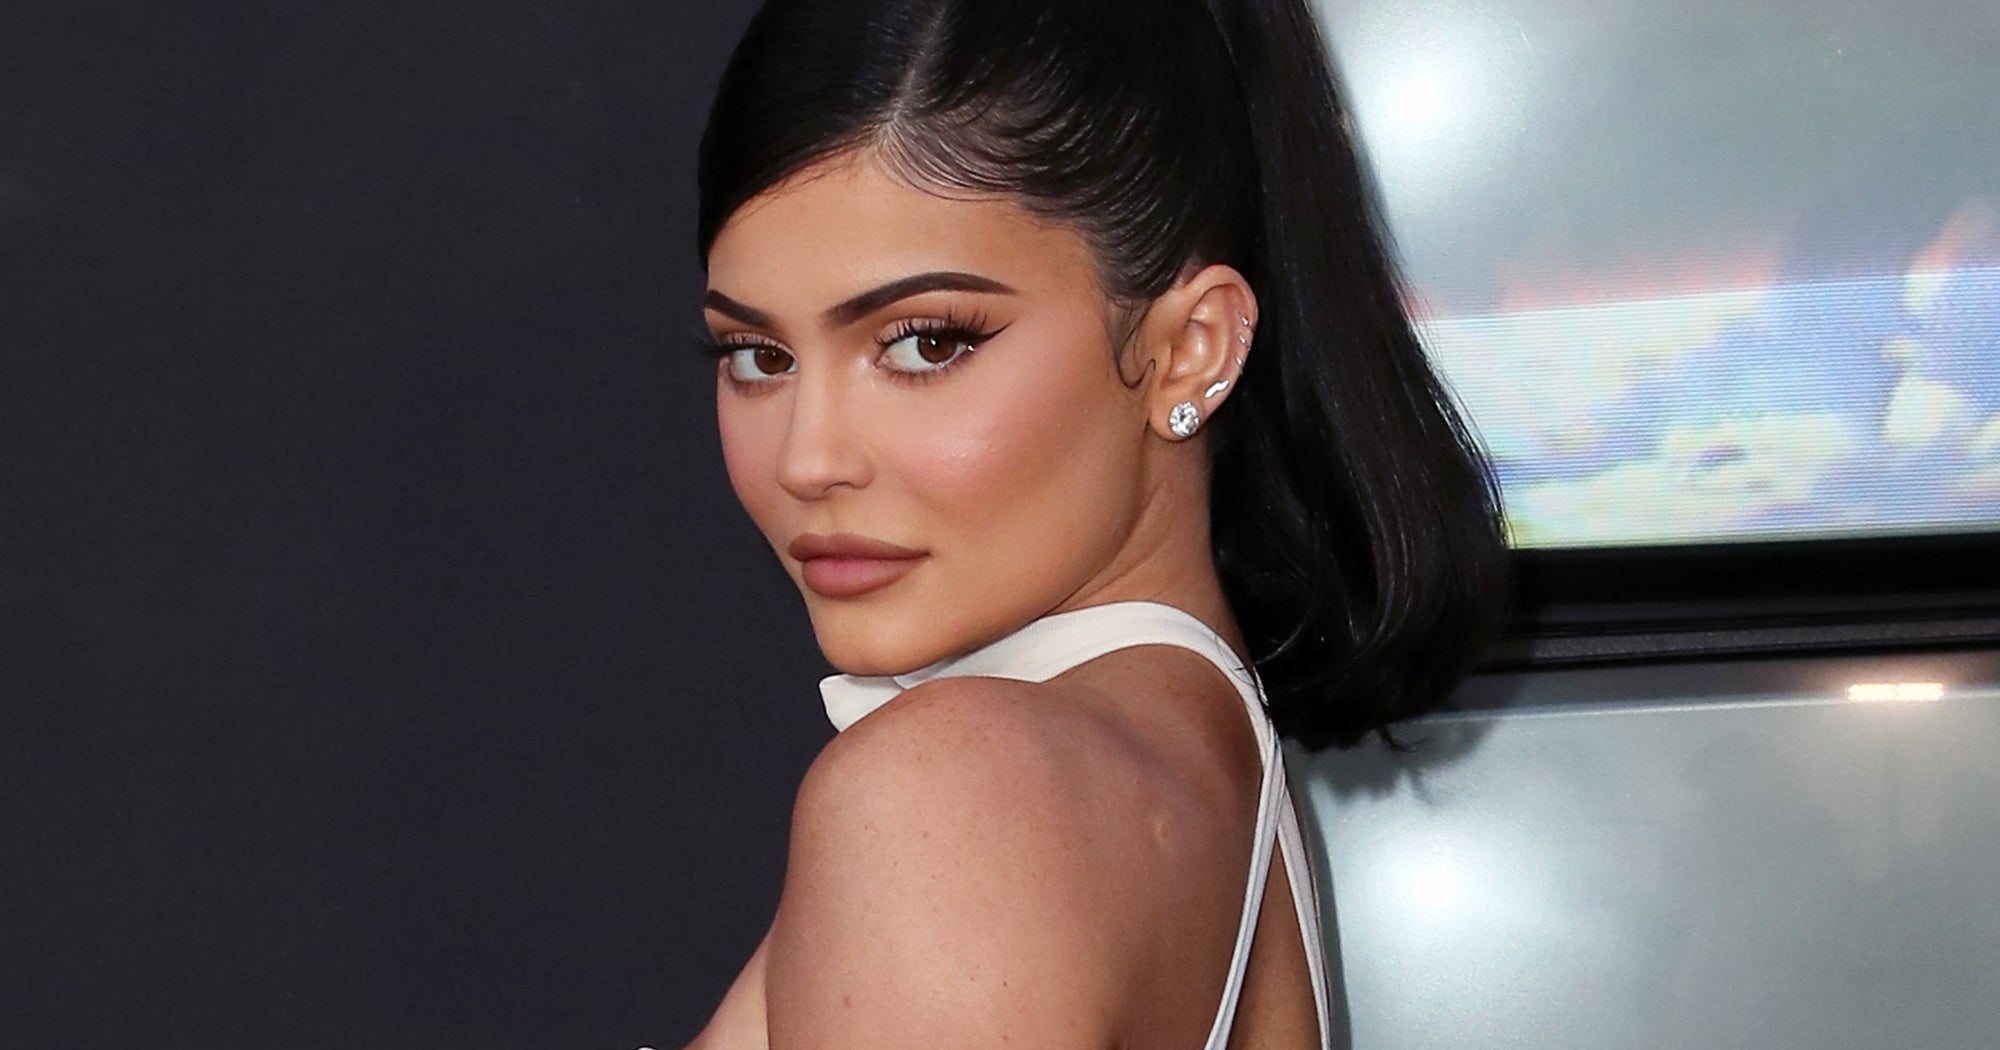 Kylie Jenner Says Being Billionaire Has Downside